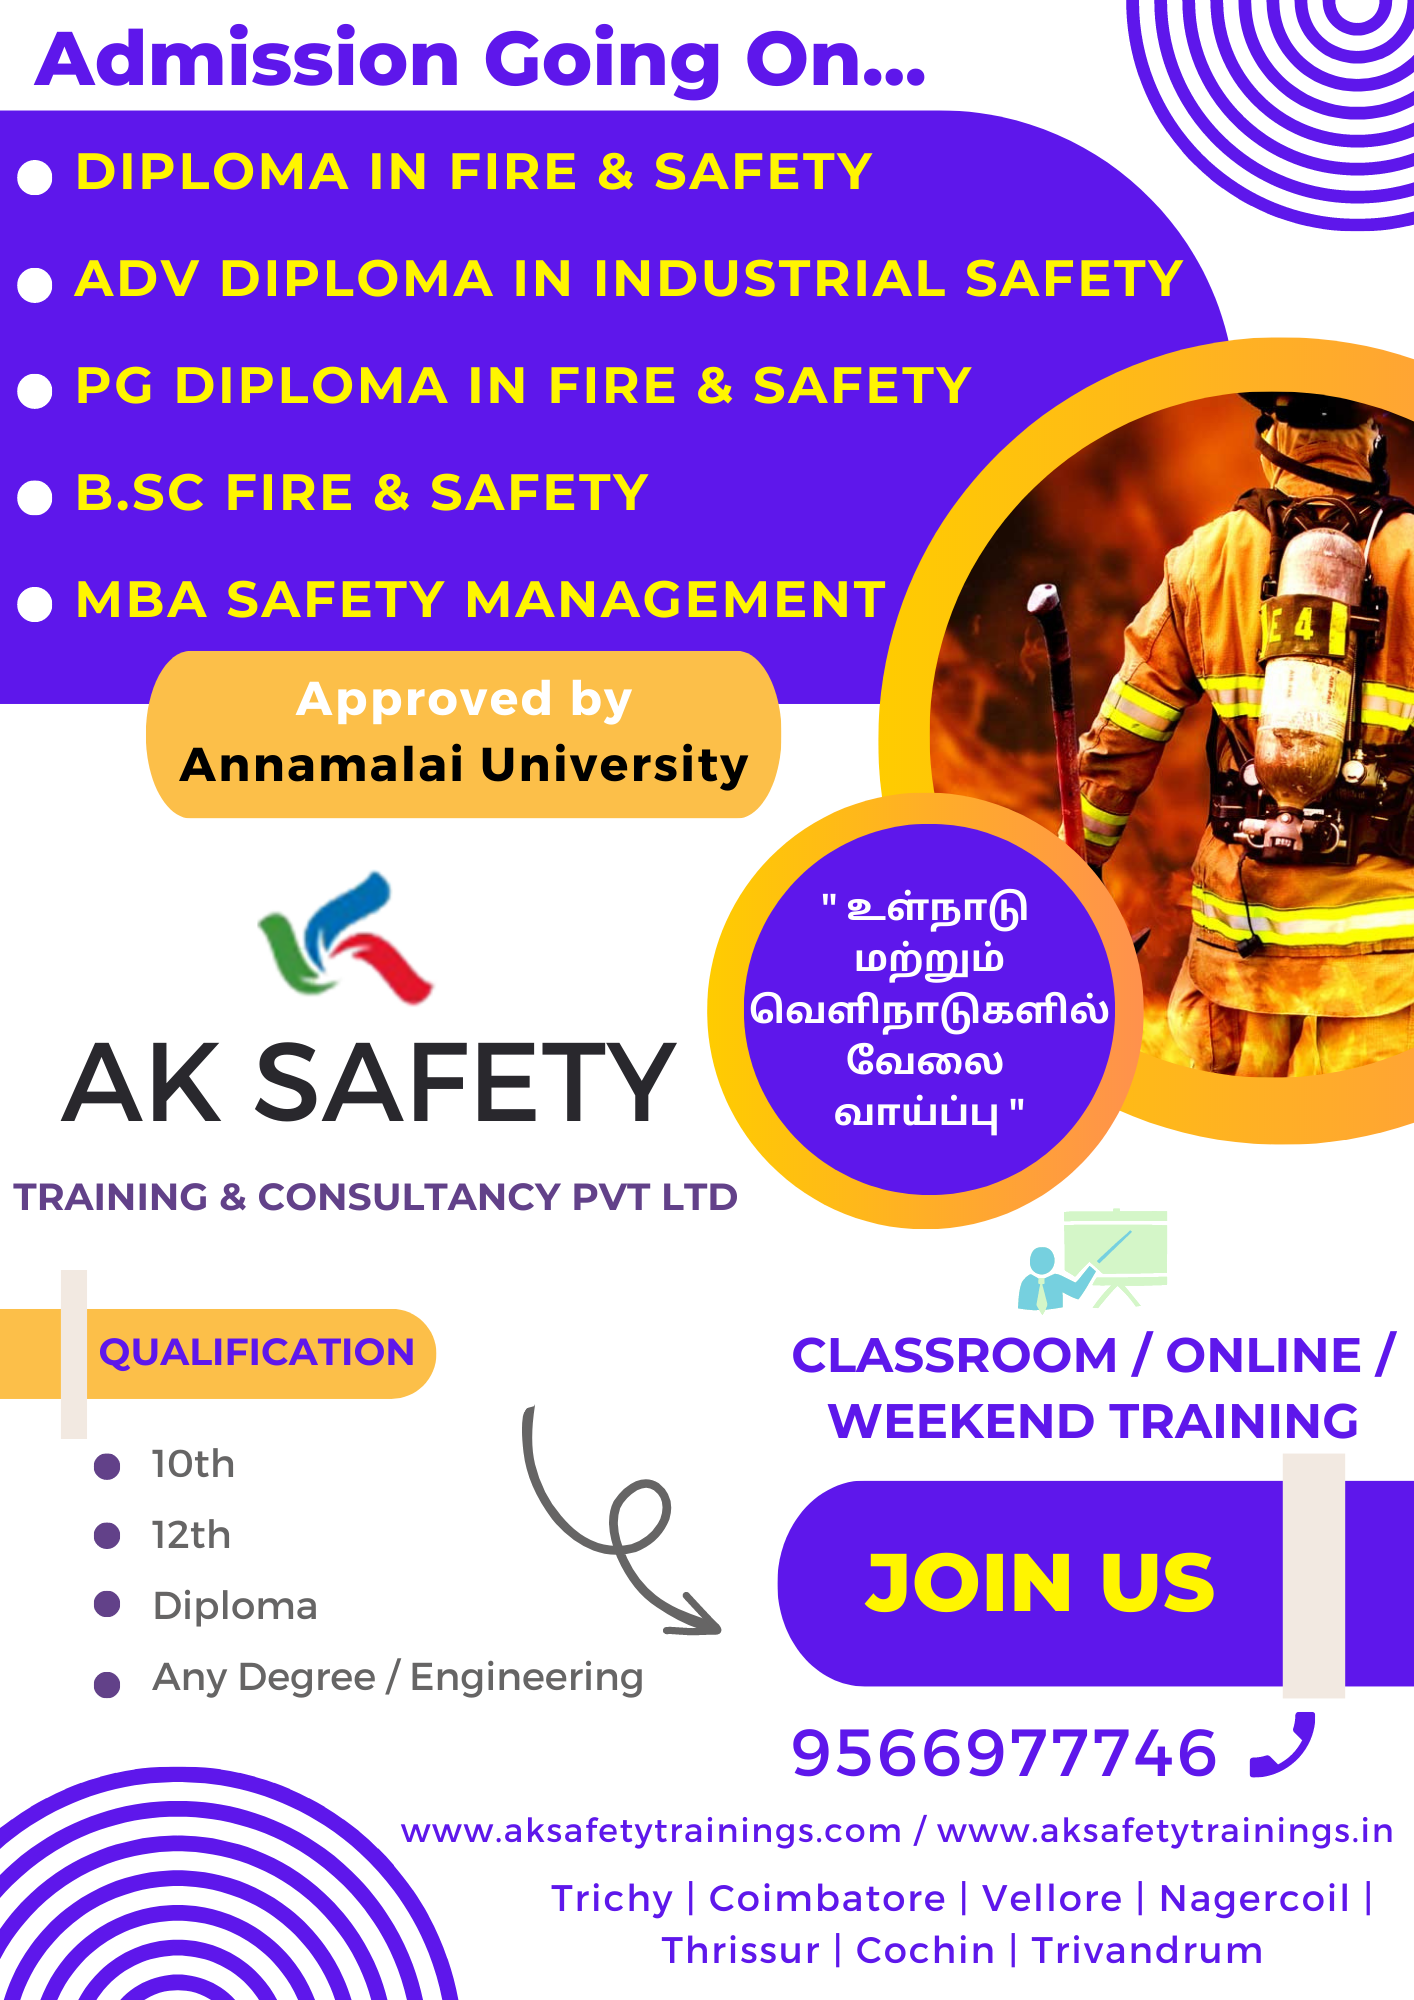 University Approved Safety Courses